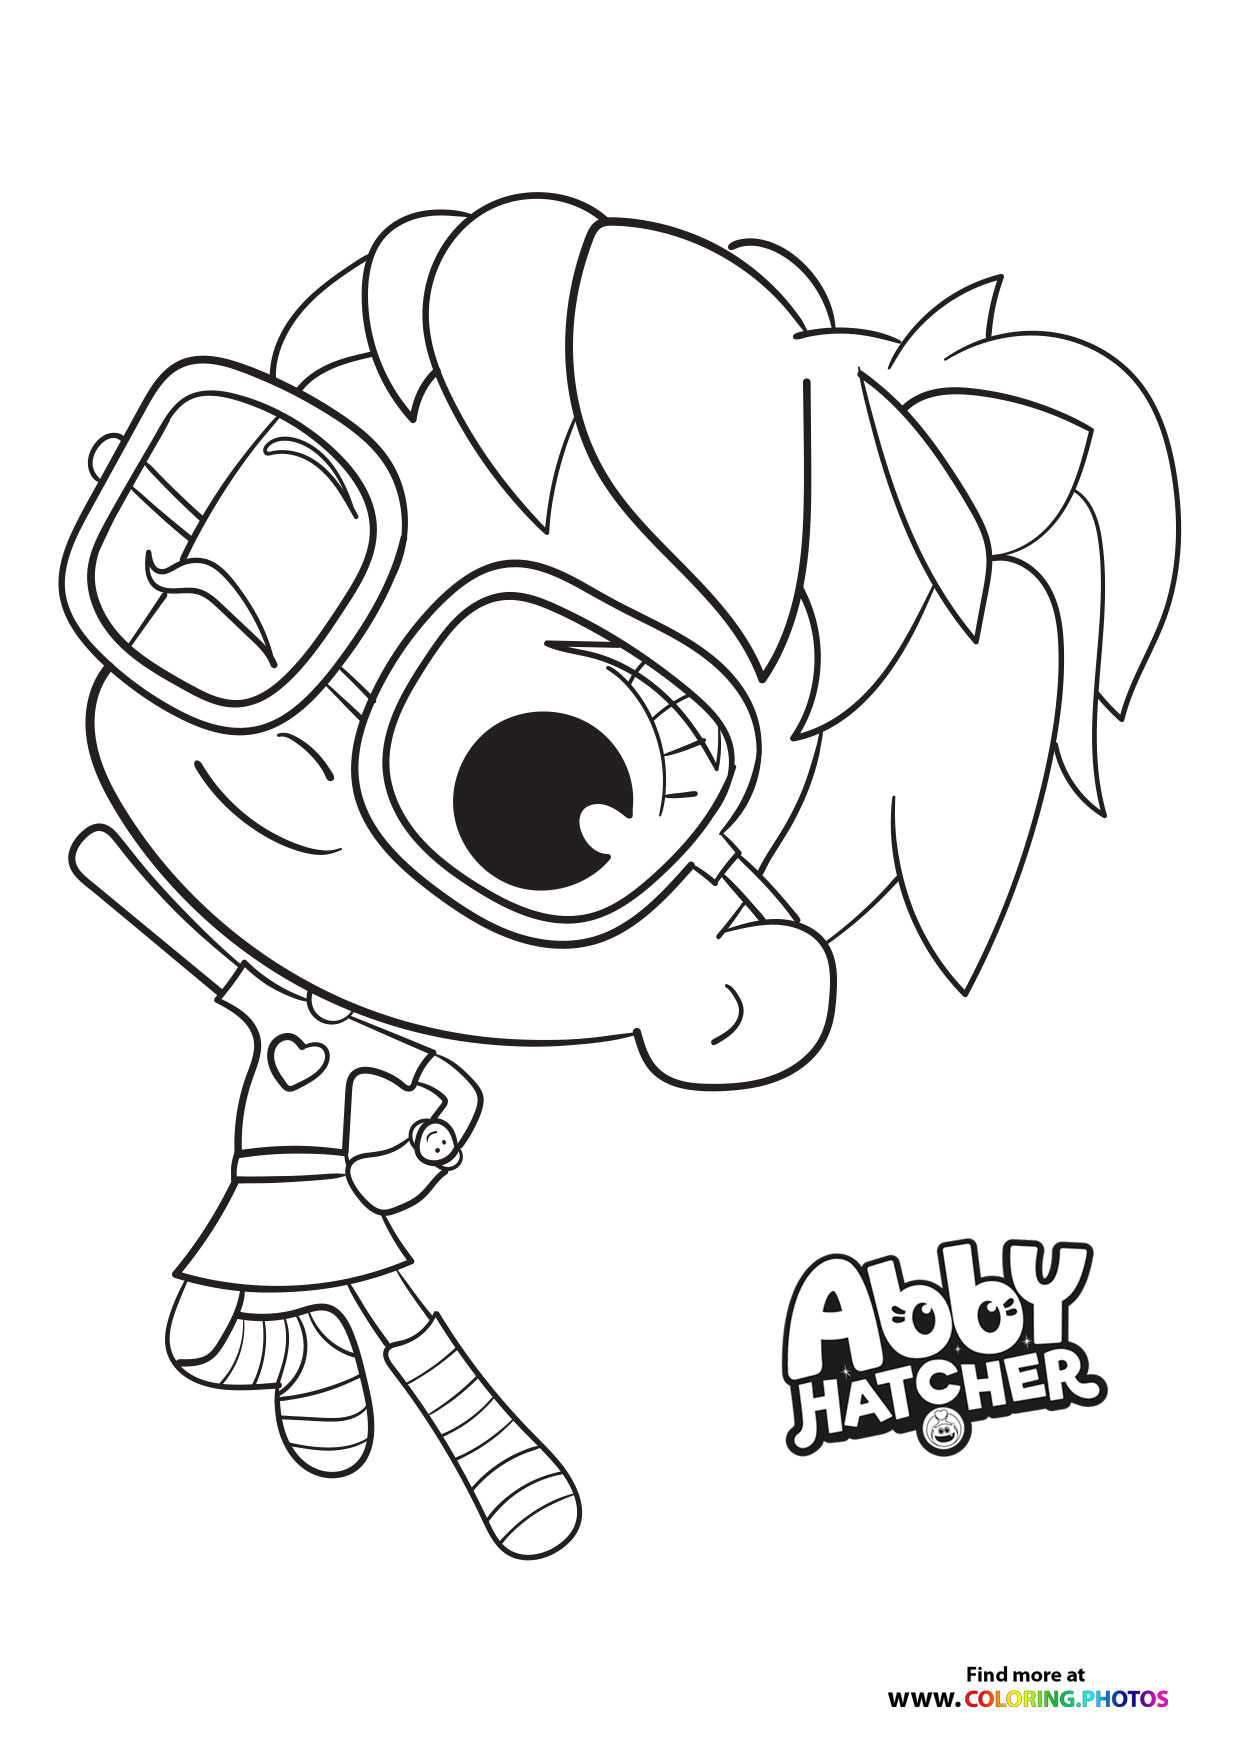 Free Printable Abby Hatcher Coloring Pages - boringpop.com